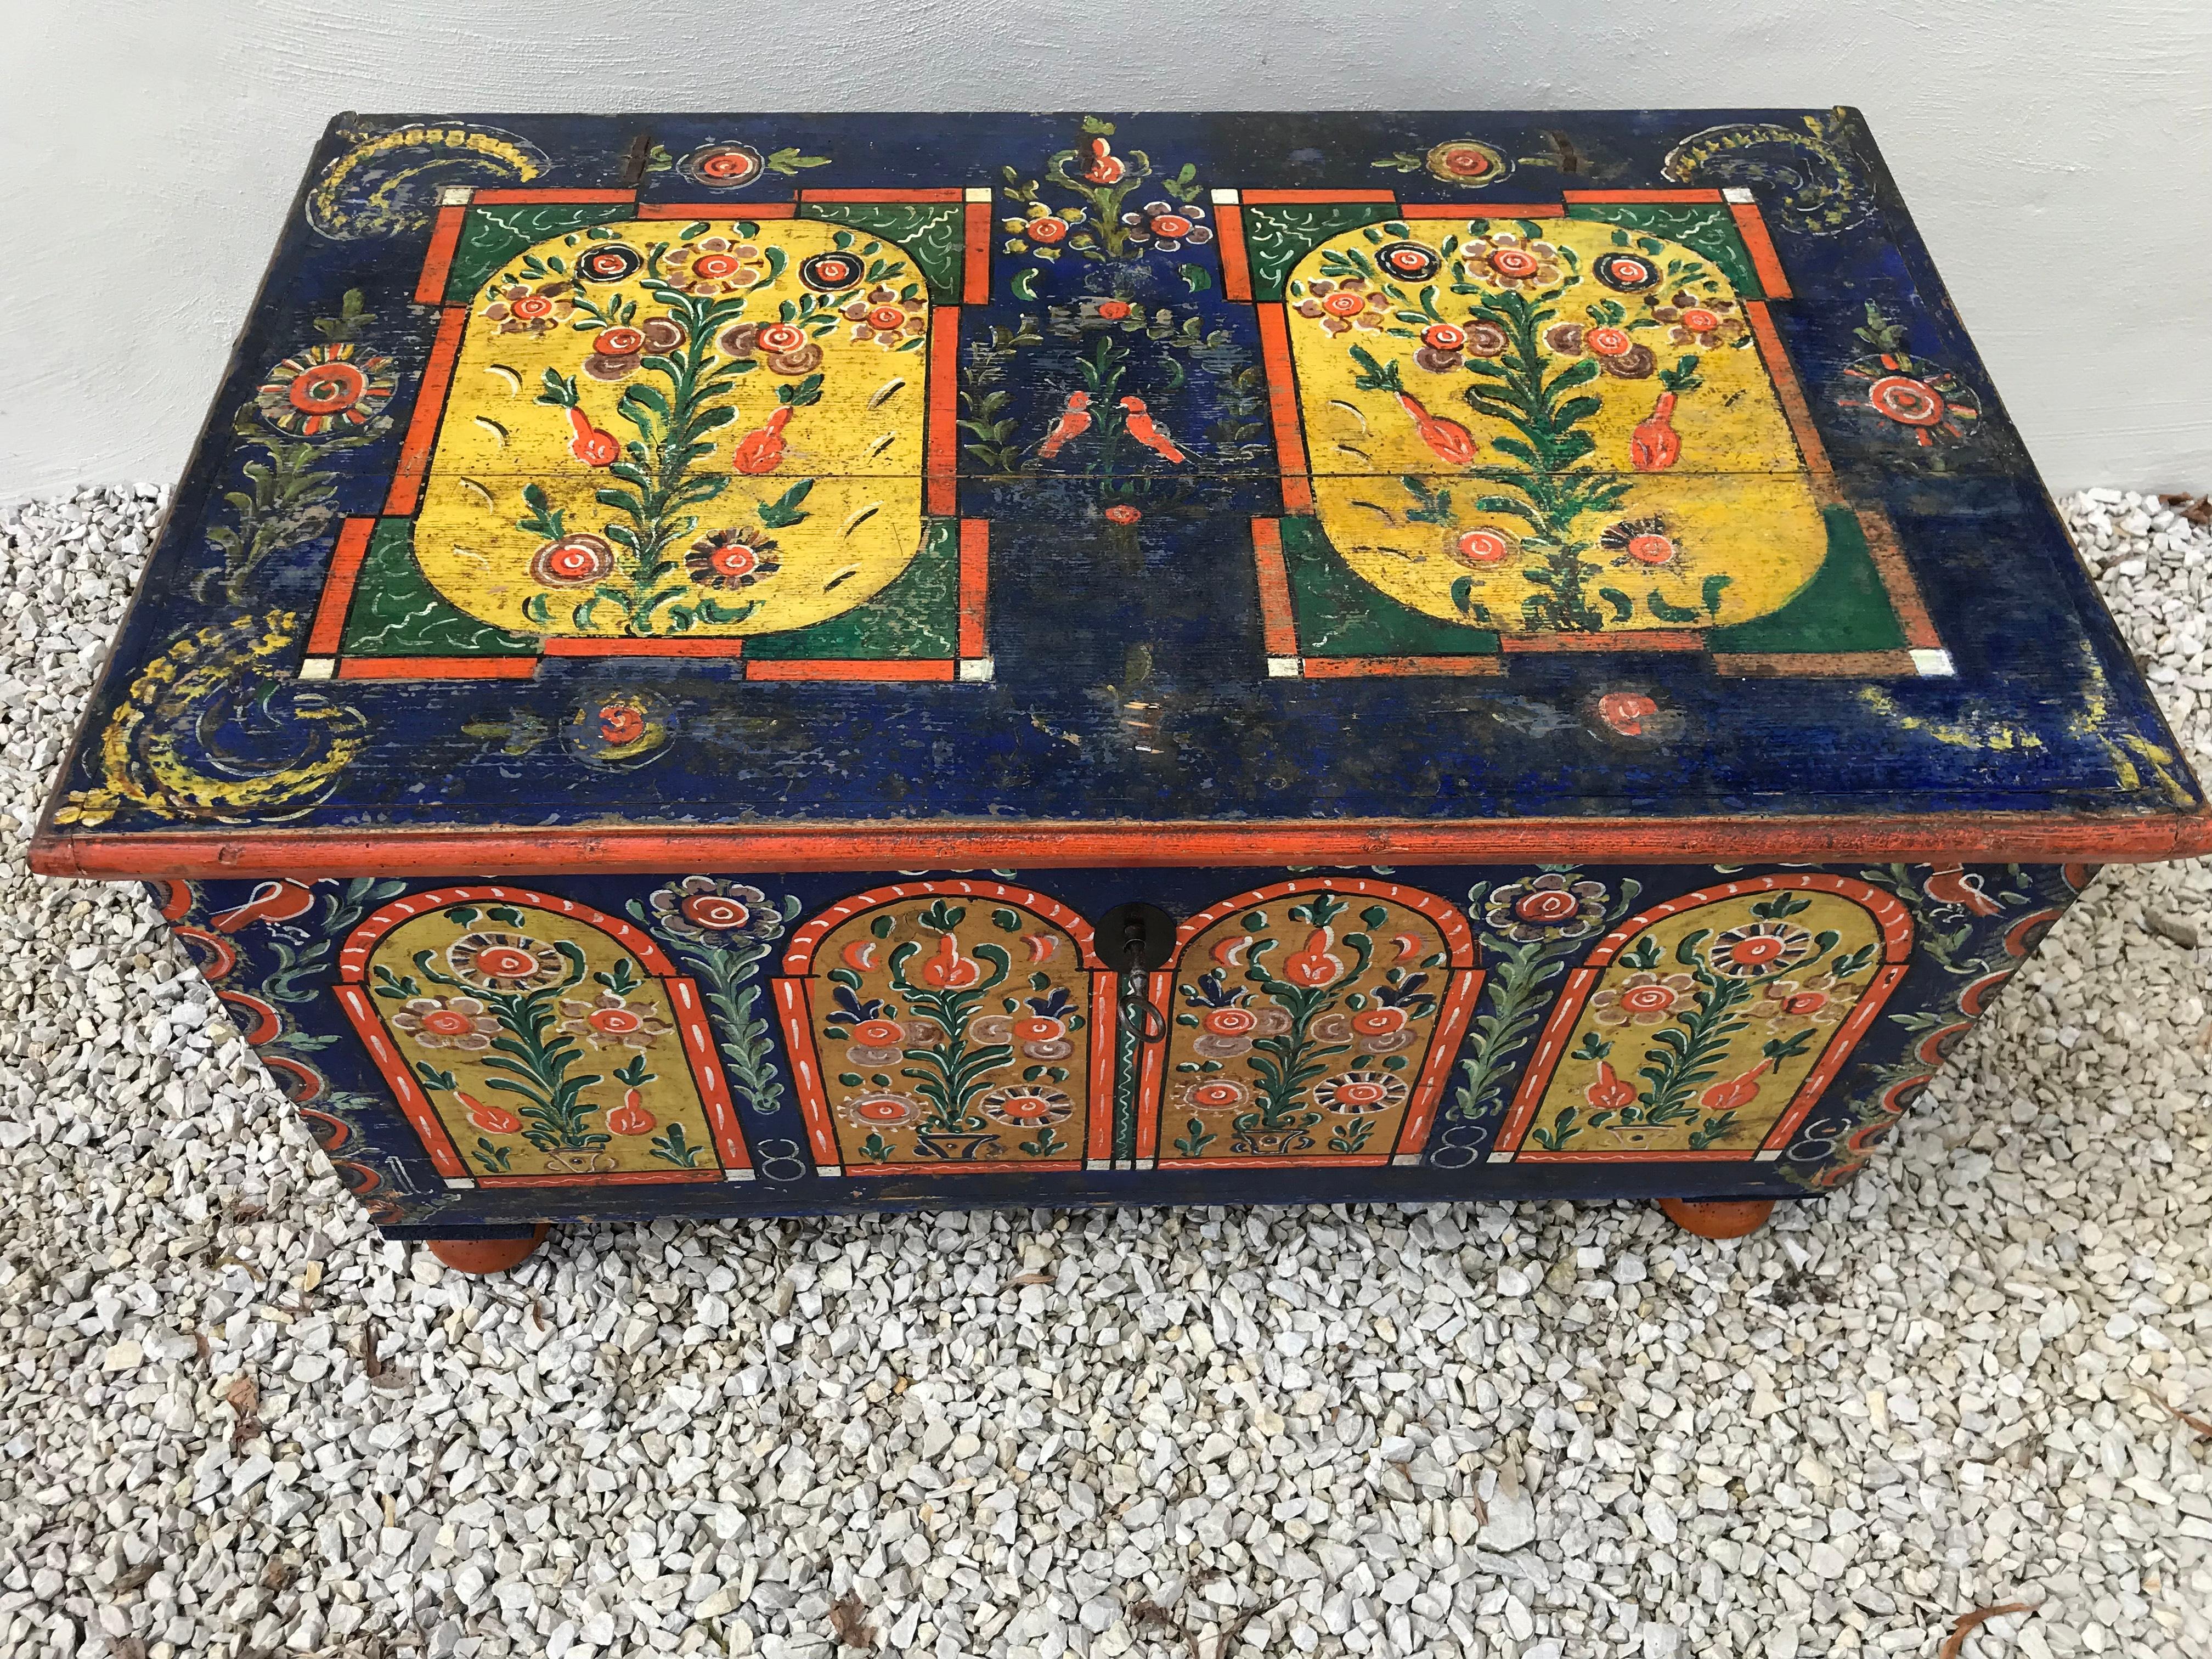 This painted chest is from Slovakia, year 1888.